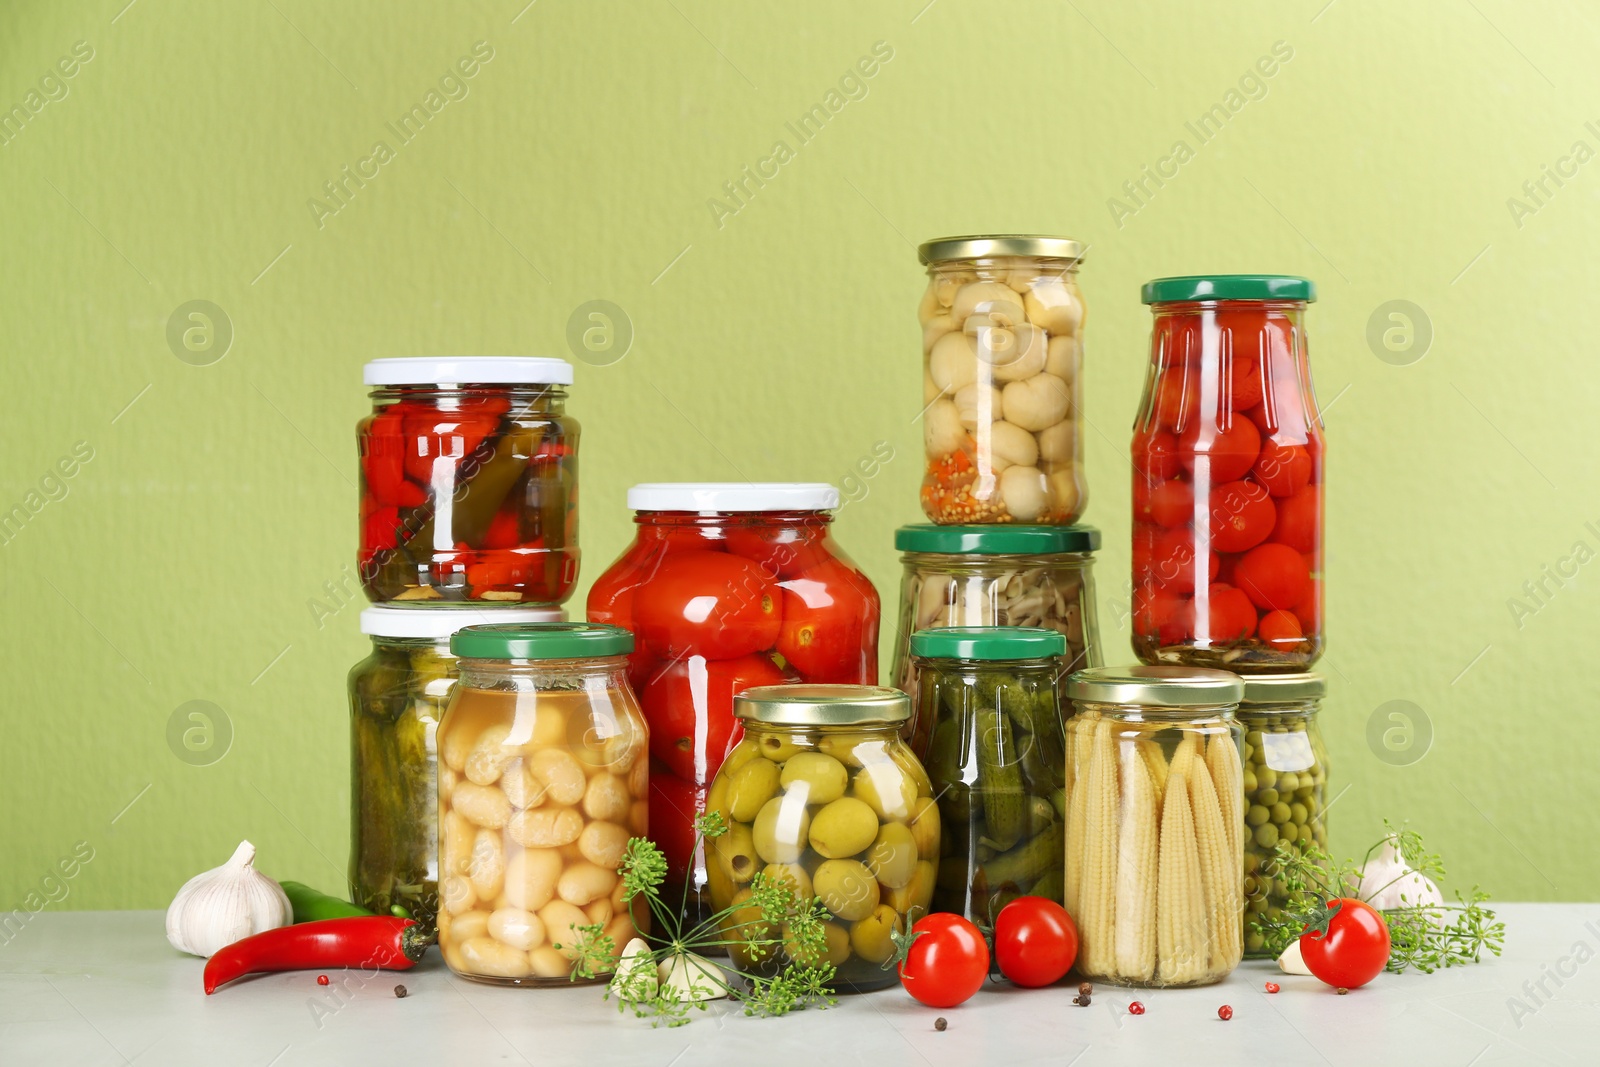 Photo of Jars of pickled vegetables and ingredients on light table